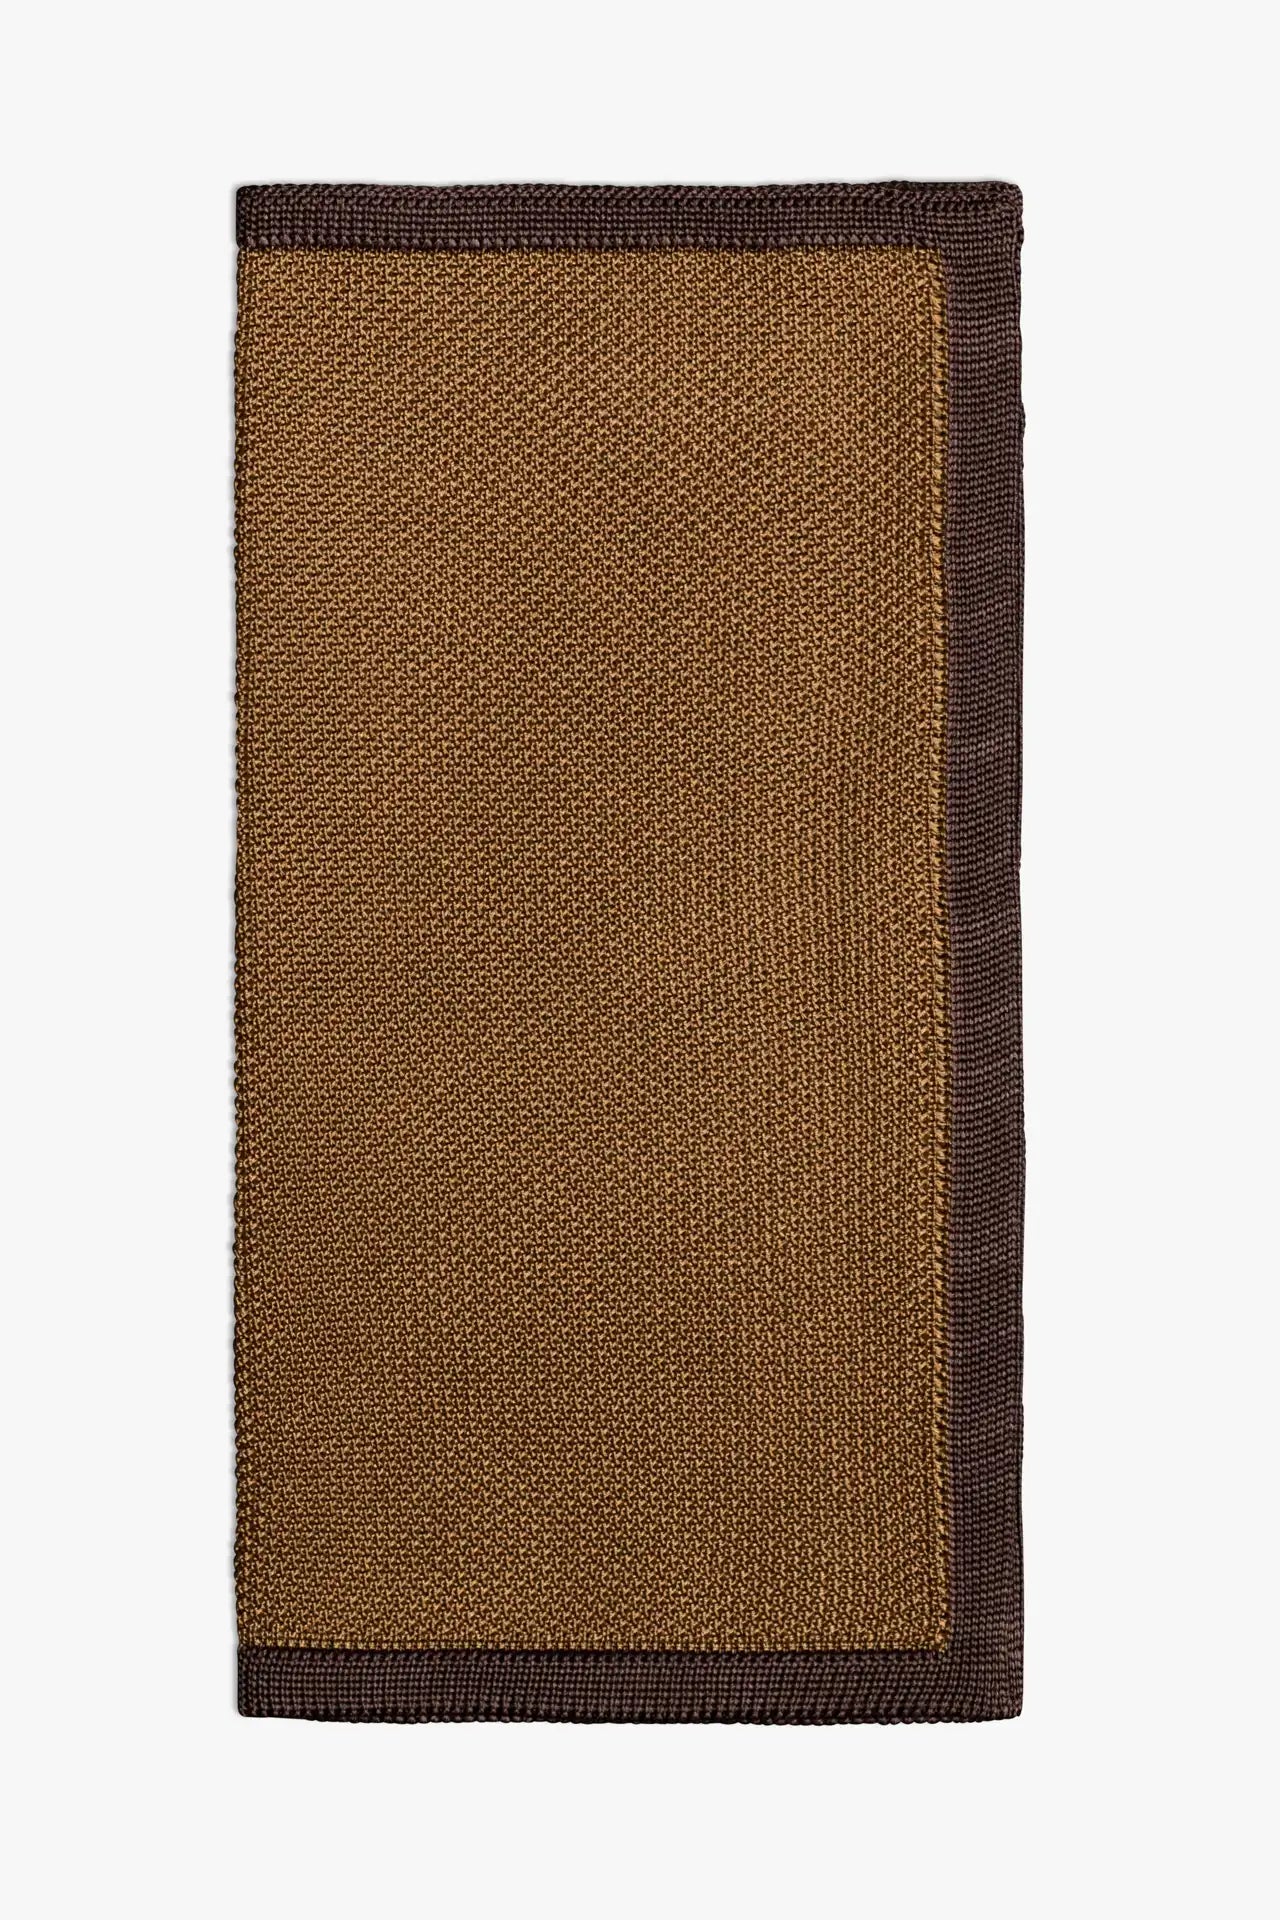 Brown knitted pocket square with dark brown boarder. Made of silk in Italy.